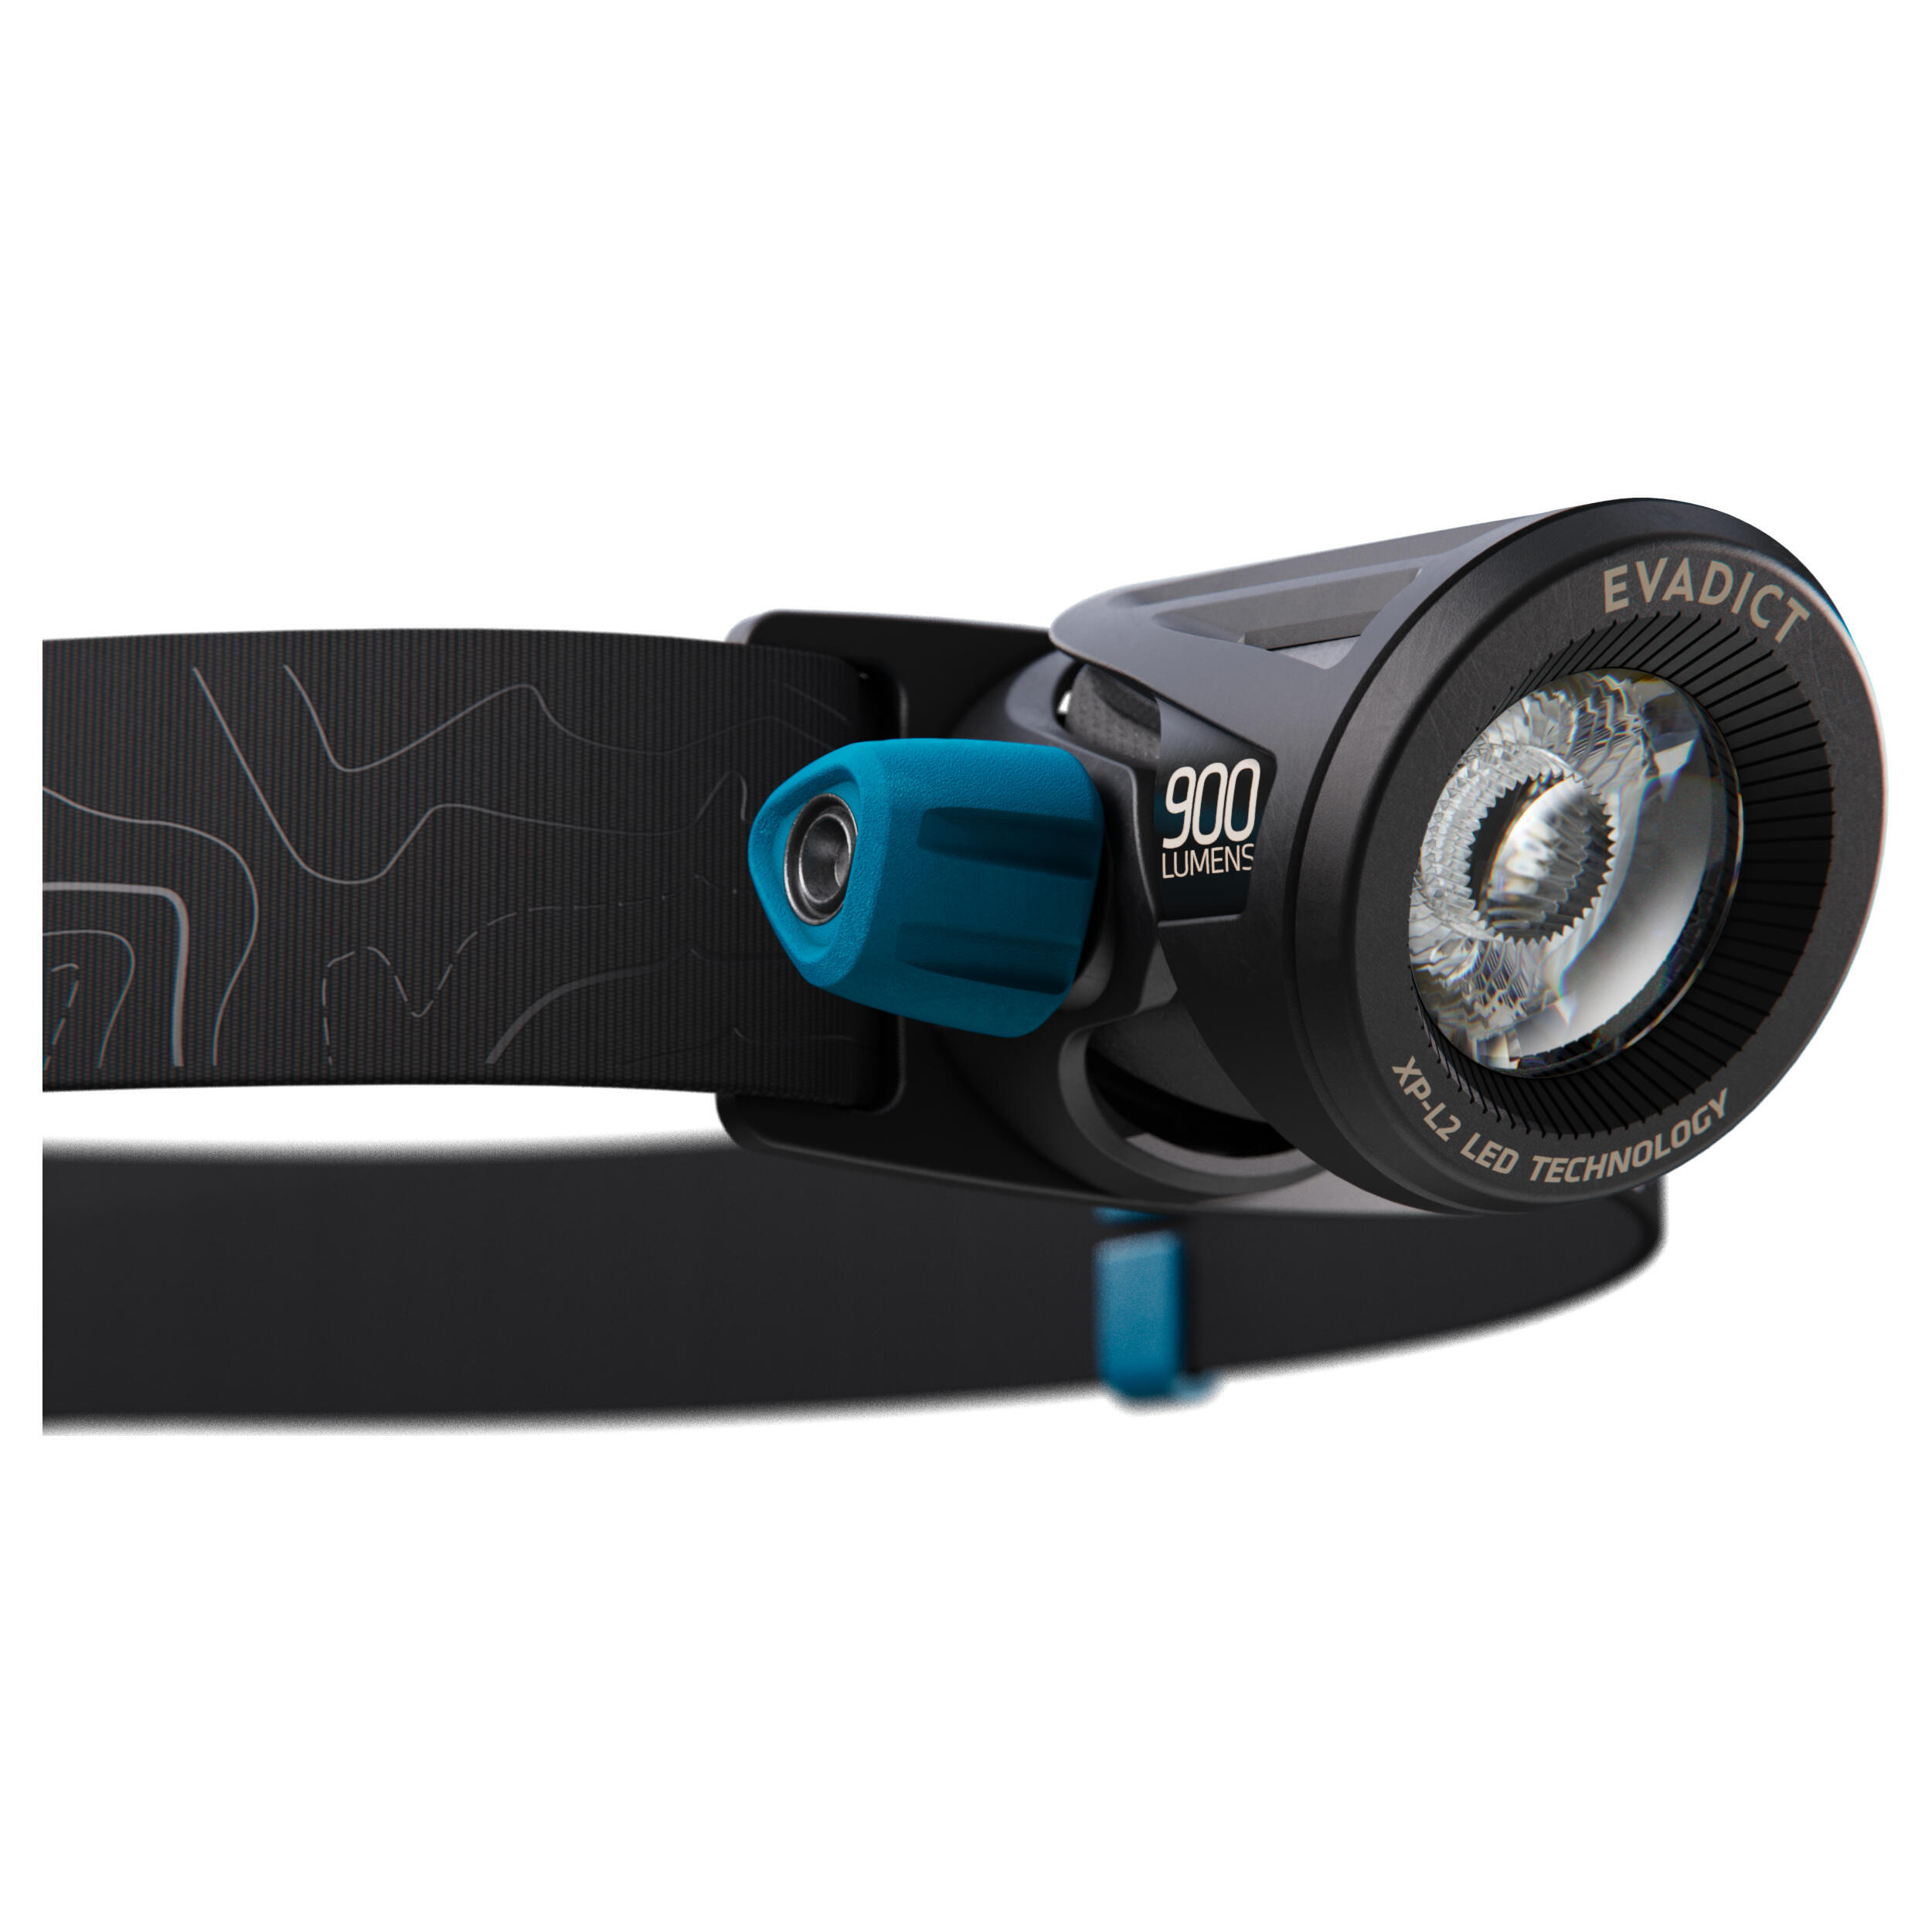 Evadict Ontrail 900 Lumens Trail Running Frontal Lamp  2/11